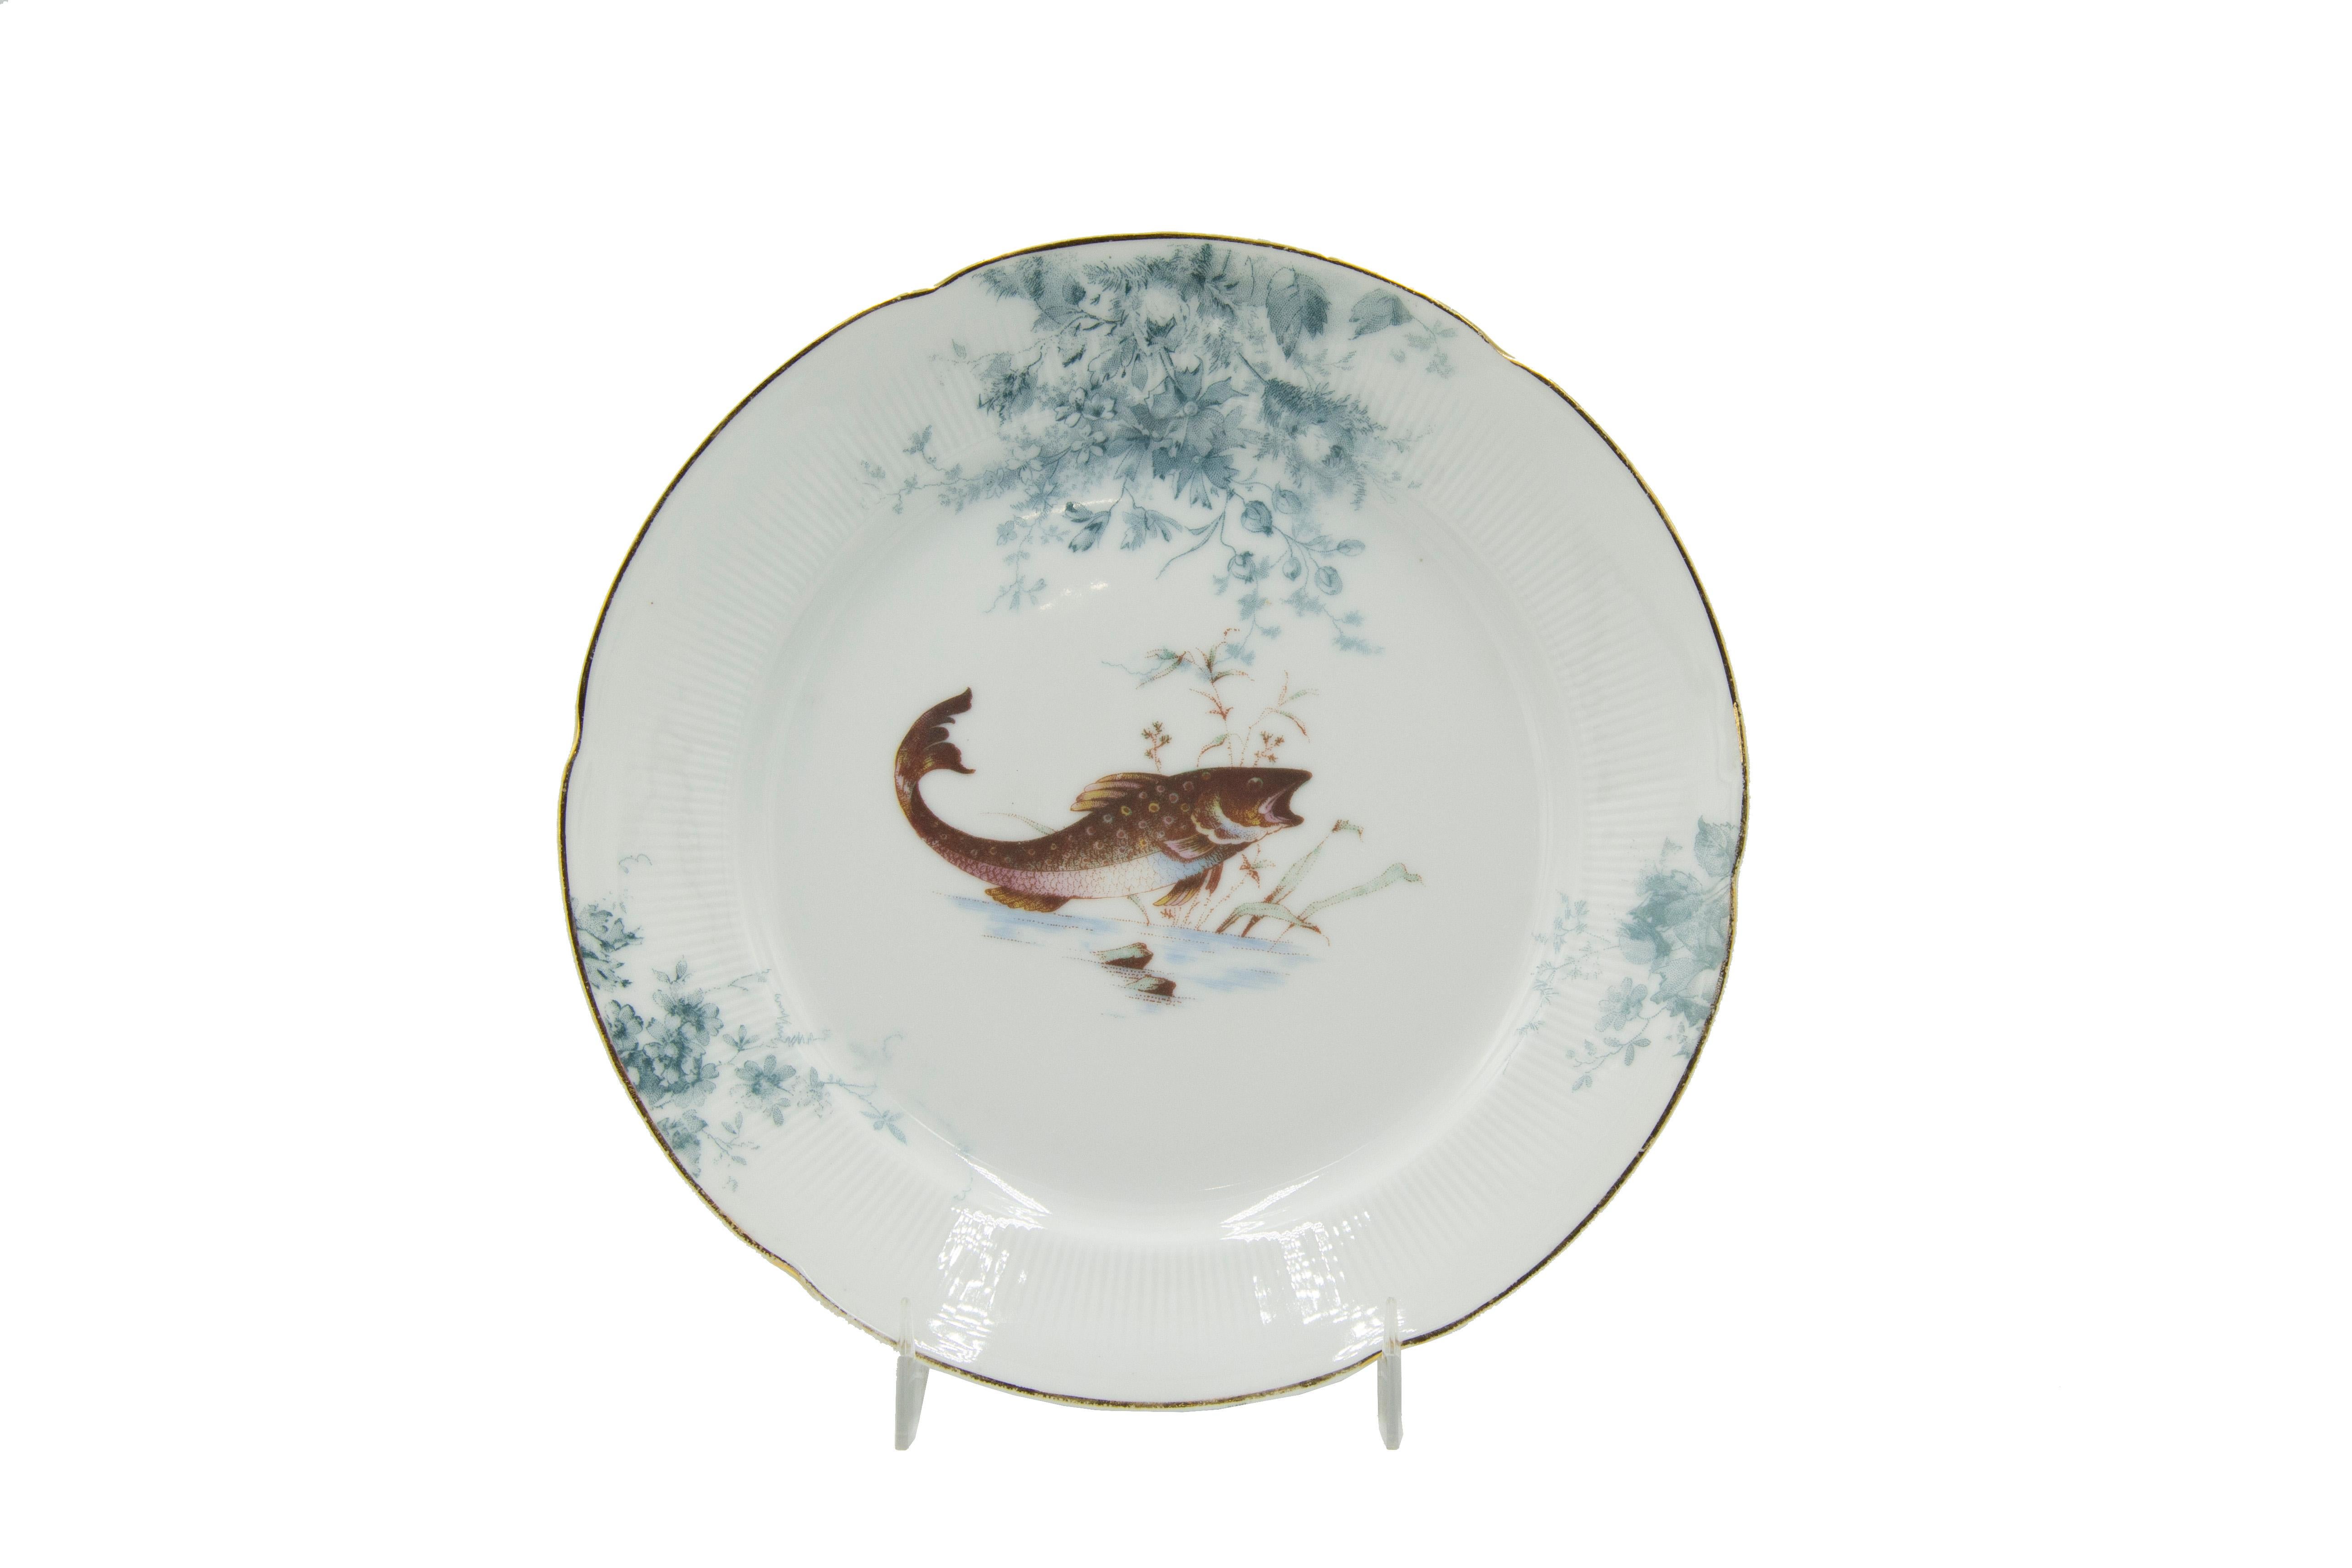 Set of 12 Austrian (19th Century) white and grey porcelain plates with floral design and fish at center (PRICED AS SET).
 